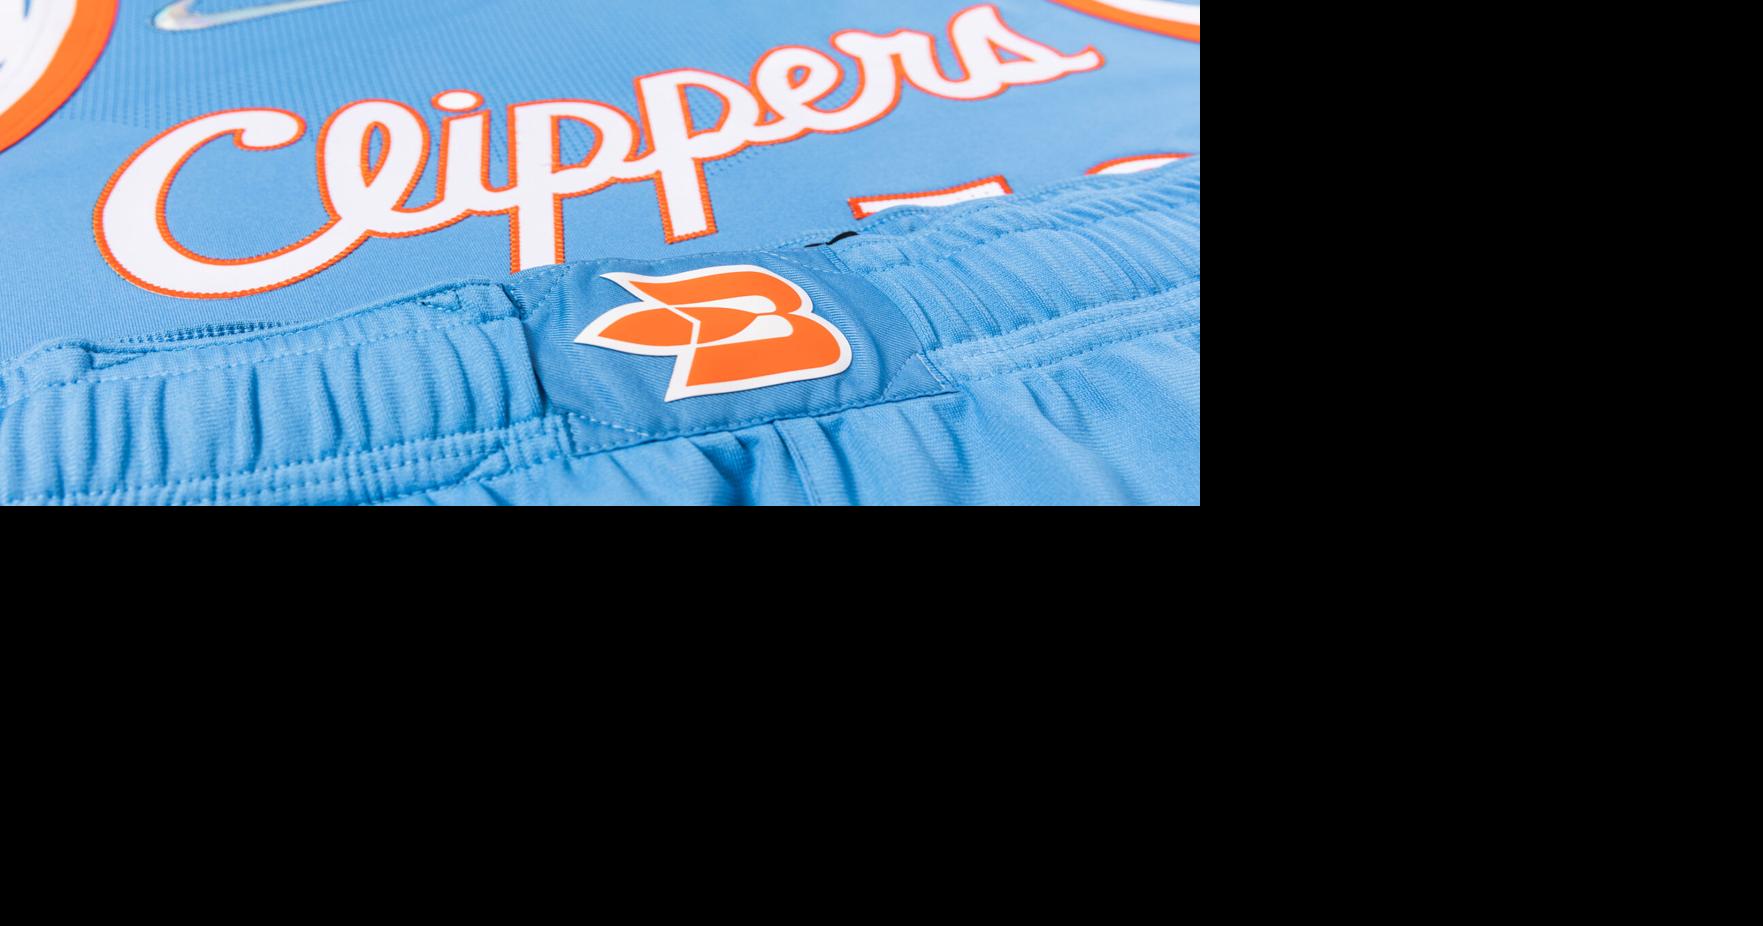 Ranking Clippers Jerseys (Buffalo Braves edition) - Clips Nation